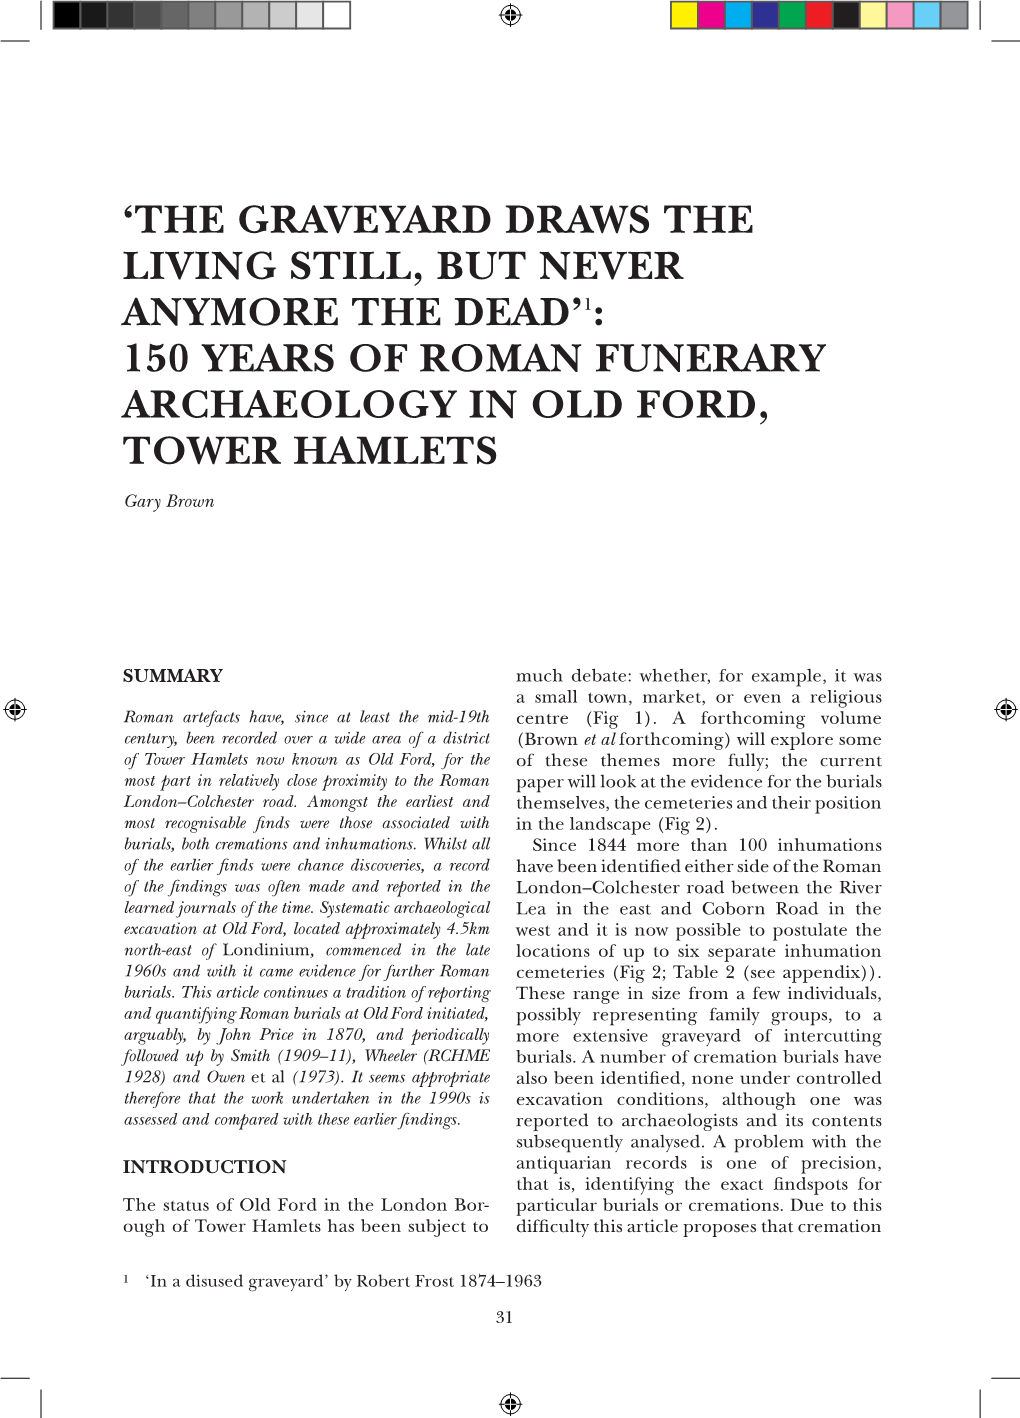 150 Years of Roman Funerary Archaeology in Old Ford, Tower Hamlets